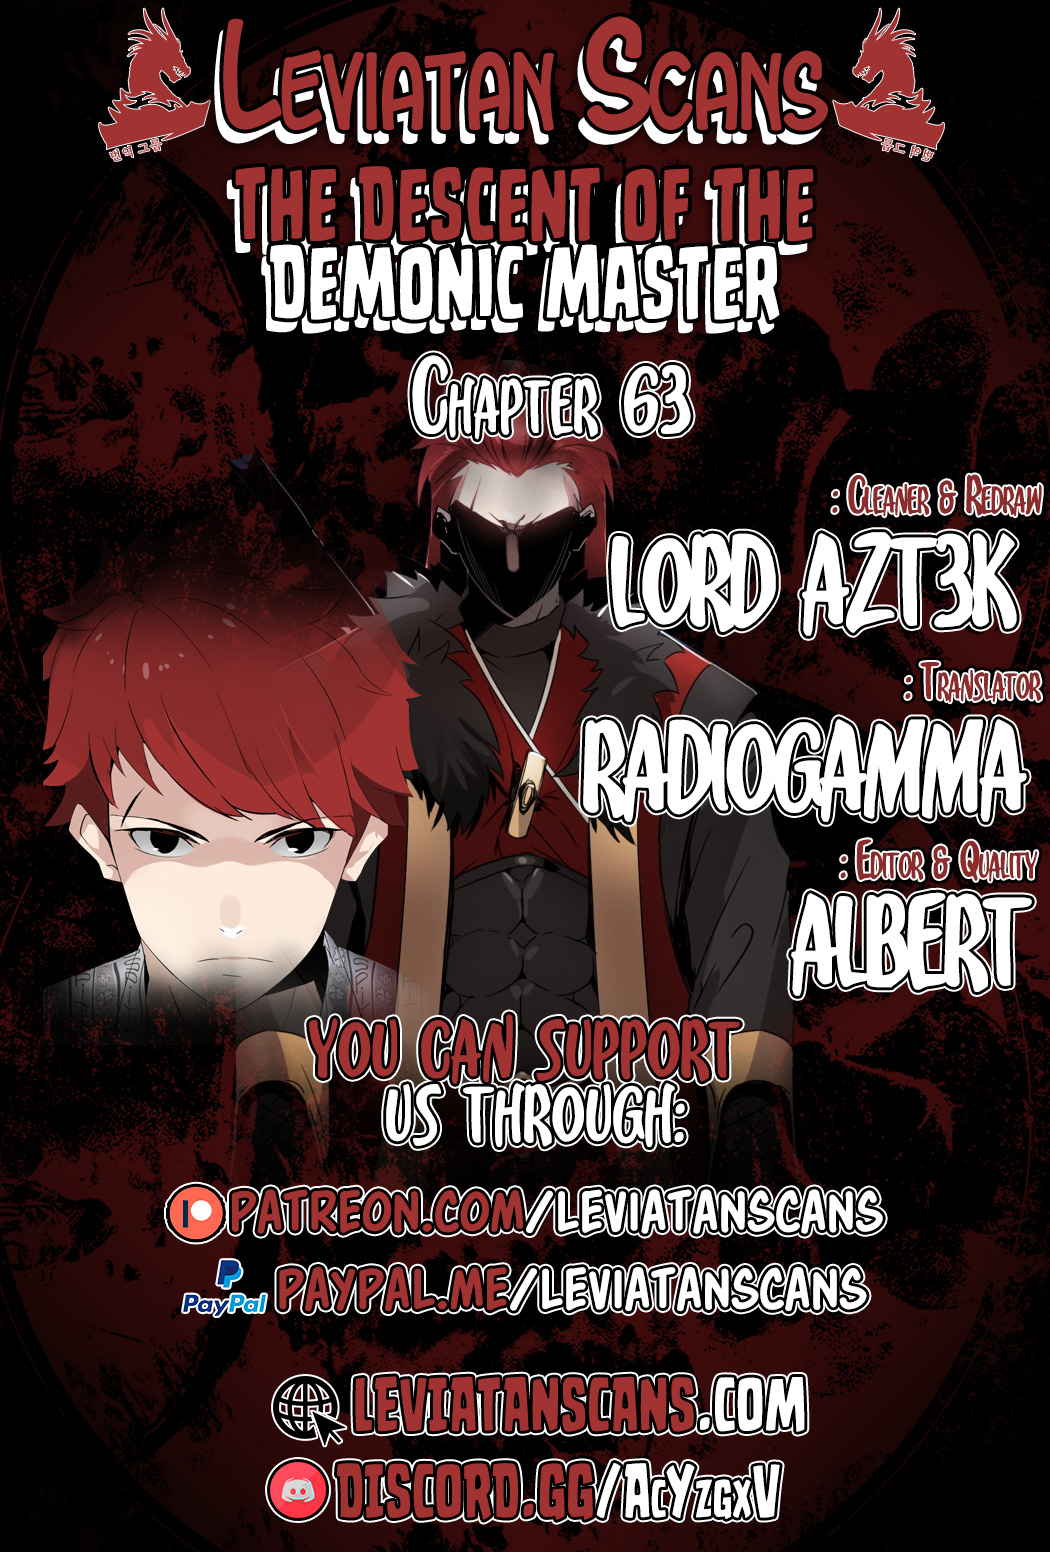 The Descent of the Demonic Master 63 (1)